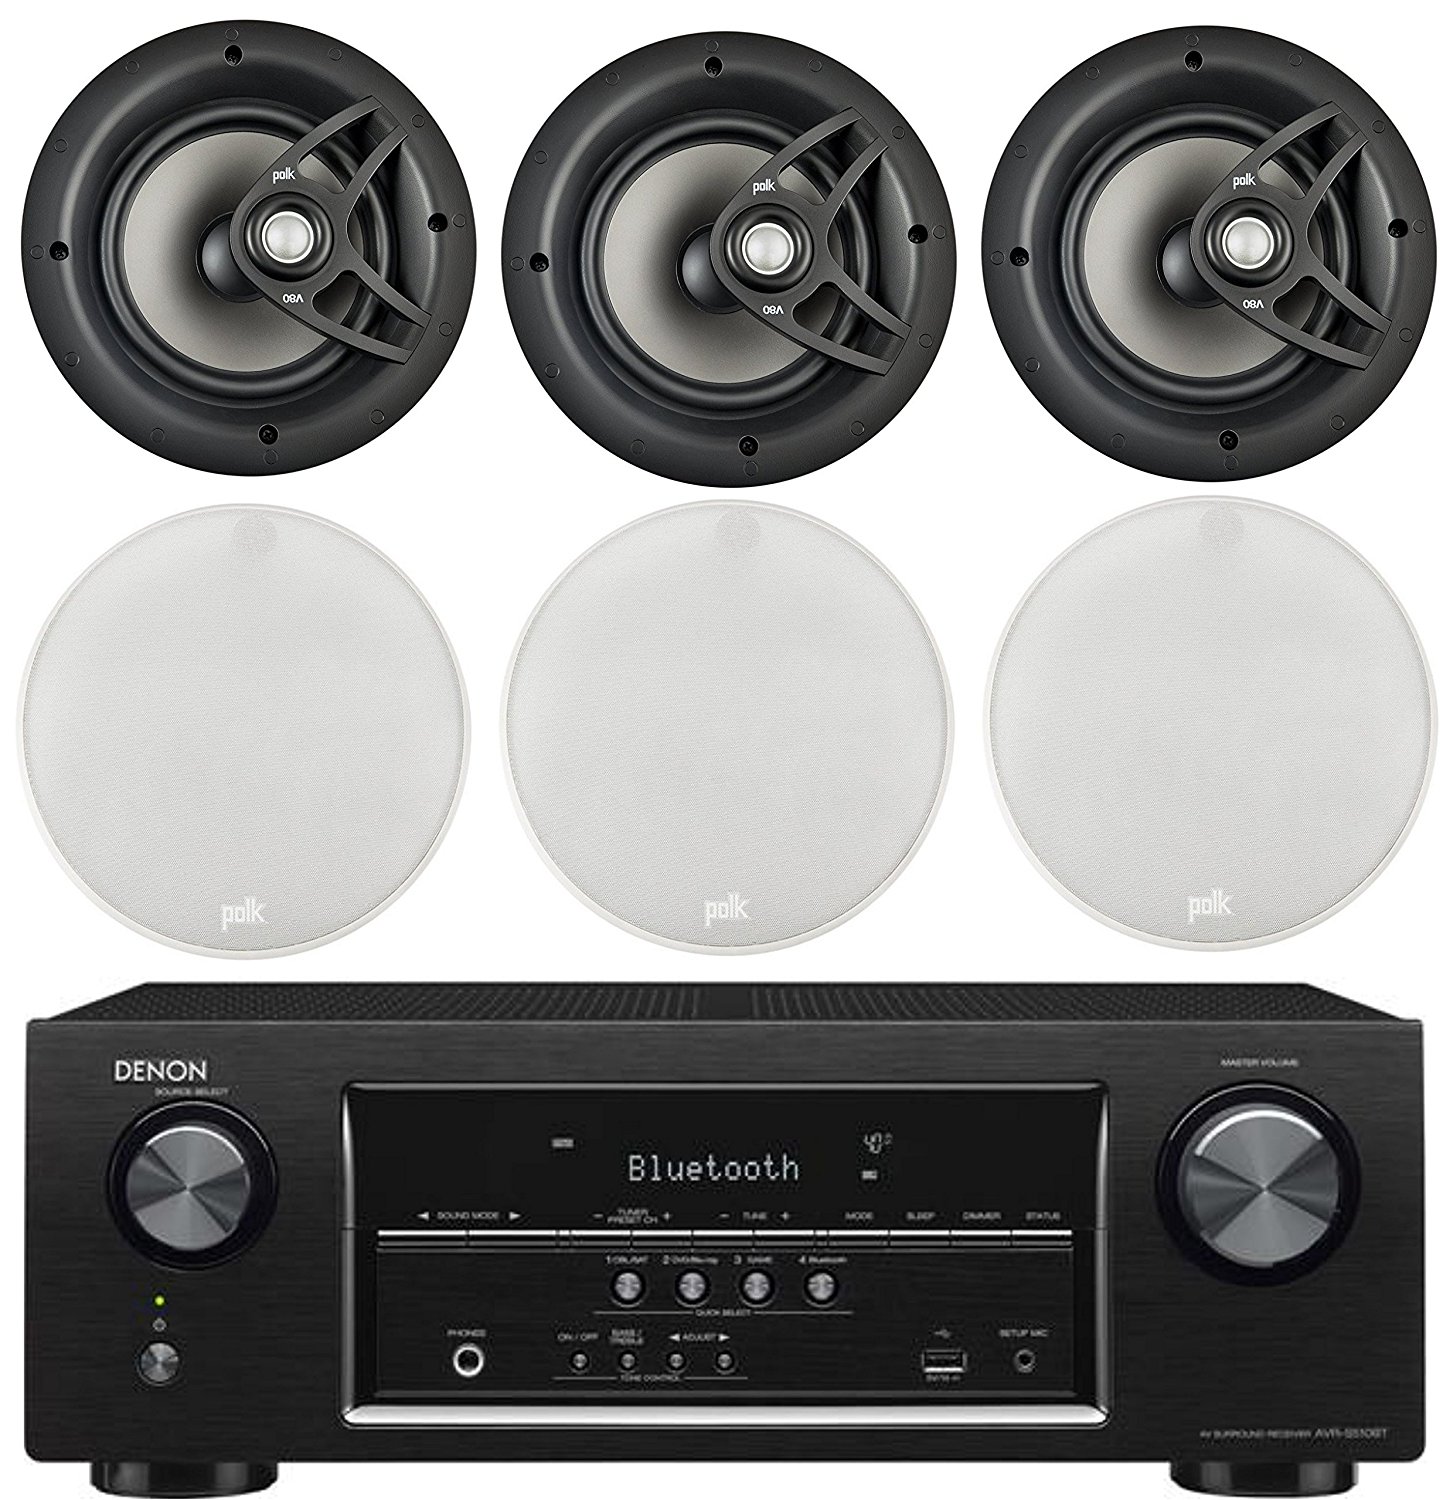 Denon 5.2 Channel 700-Watt Full 4K Ultra HD Bluetooth AV Home Theater Receiver + Polk 8" 2 Way High-Performance Natural Surround Sound In-Ceiling Speaker System (Set Of 6) - image 1 of 1